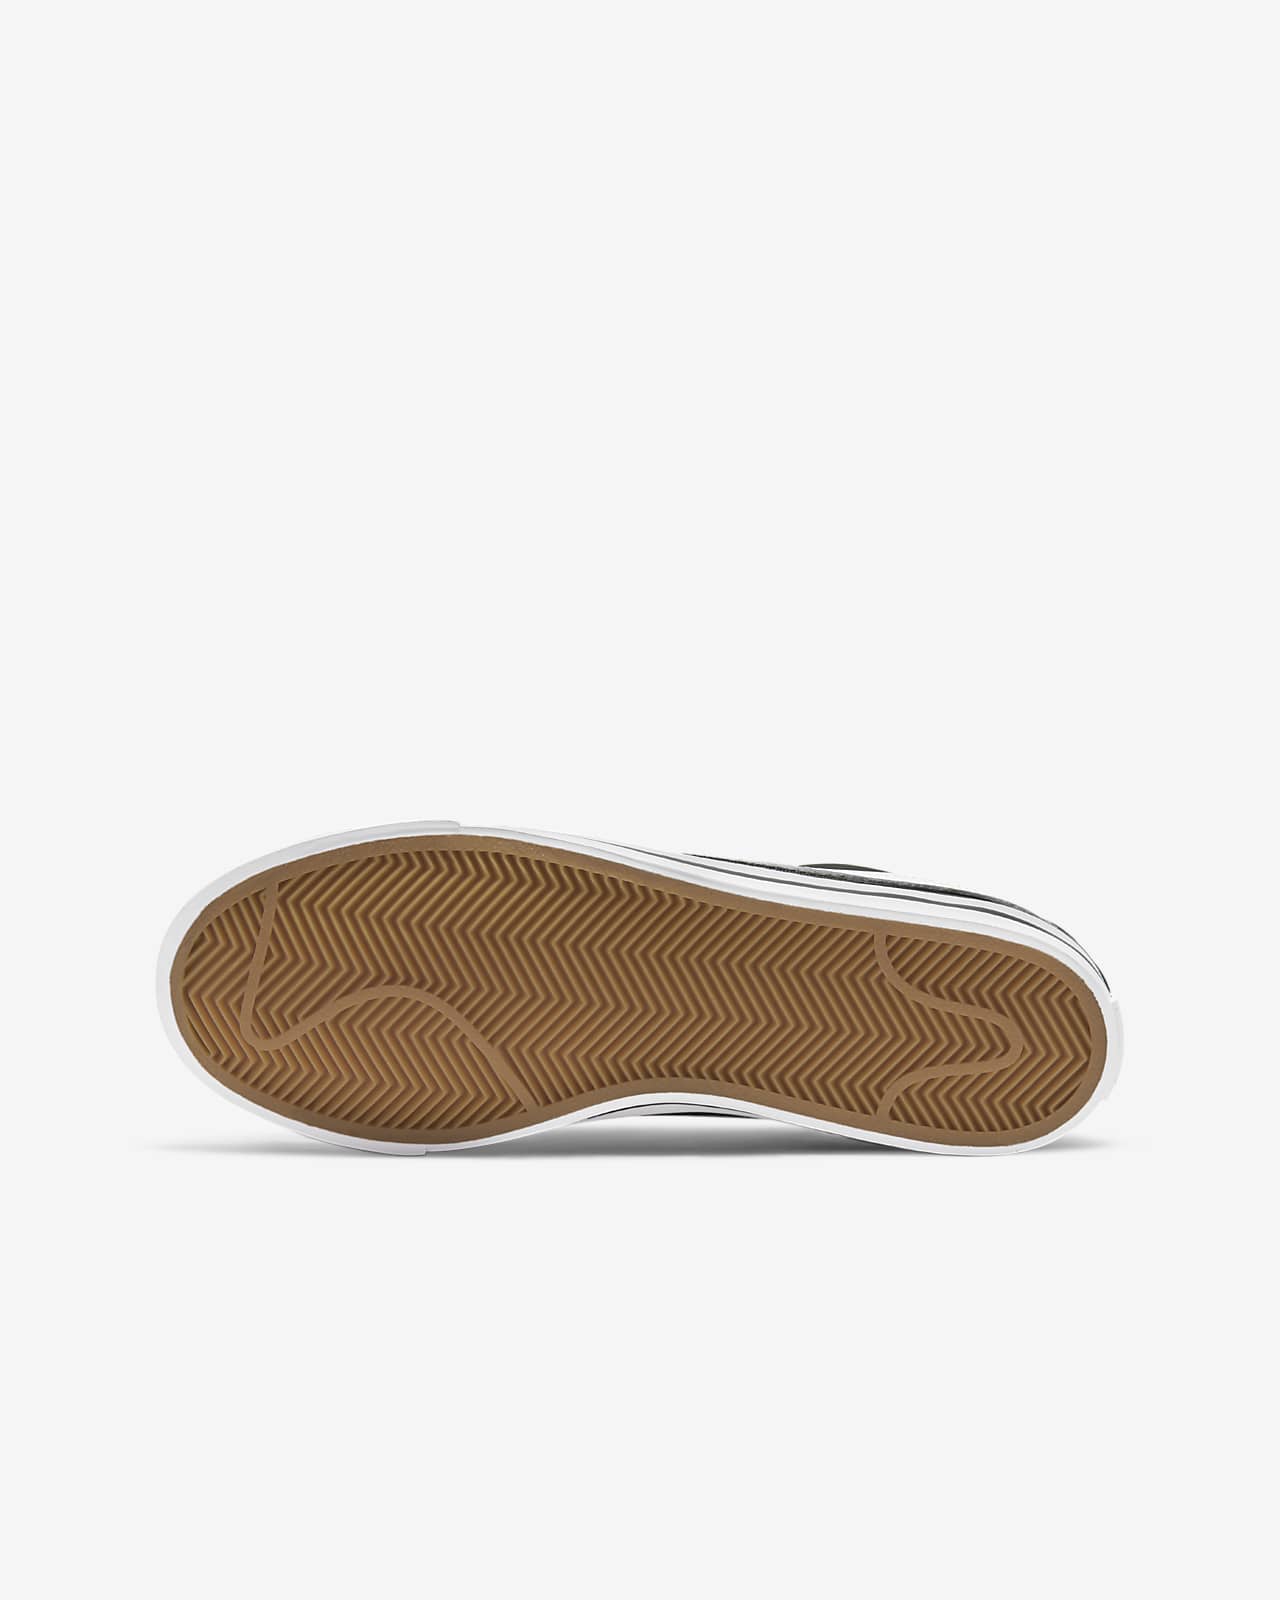 nike slippers for toddlers